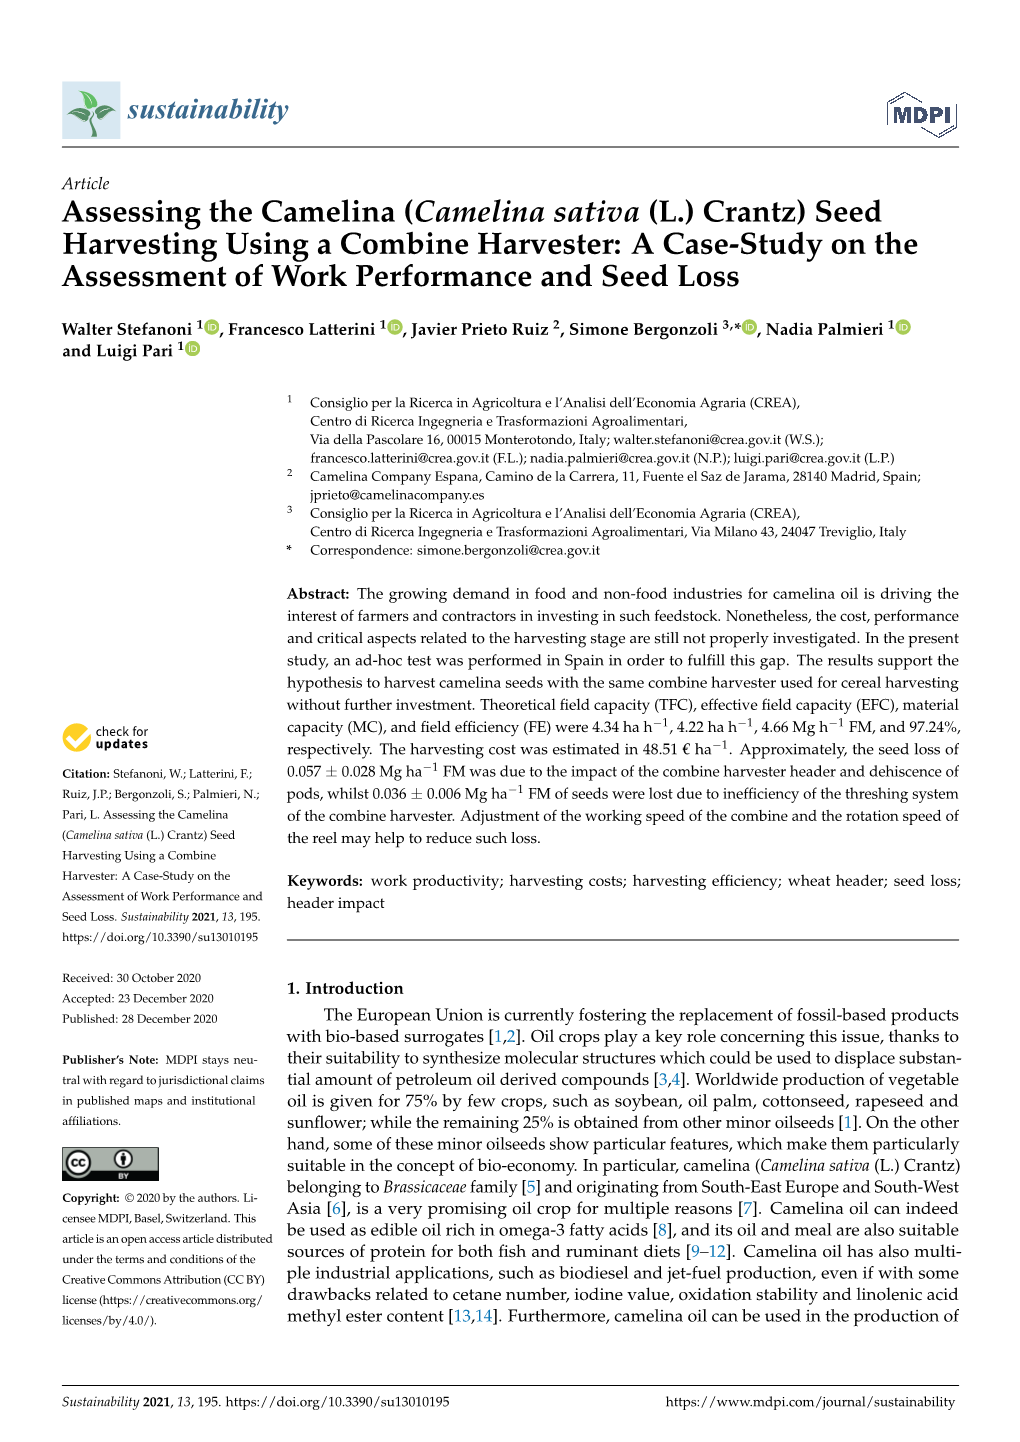 (Camelina Sativa (L.) Crantz) Seed Harvesting Using a Combine Harvester: a Case-Study on the Assessment of Work Performance and Seed Loss